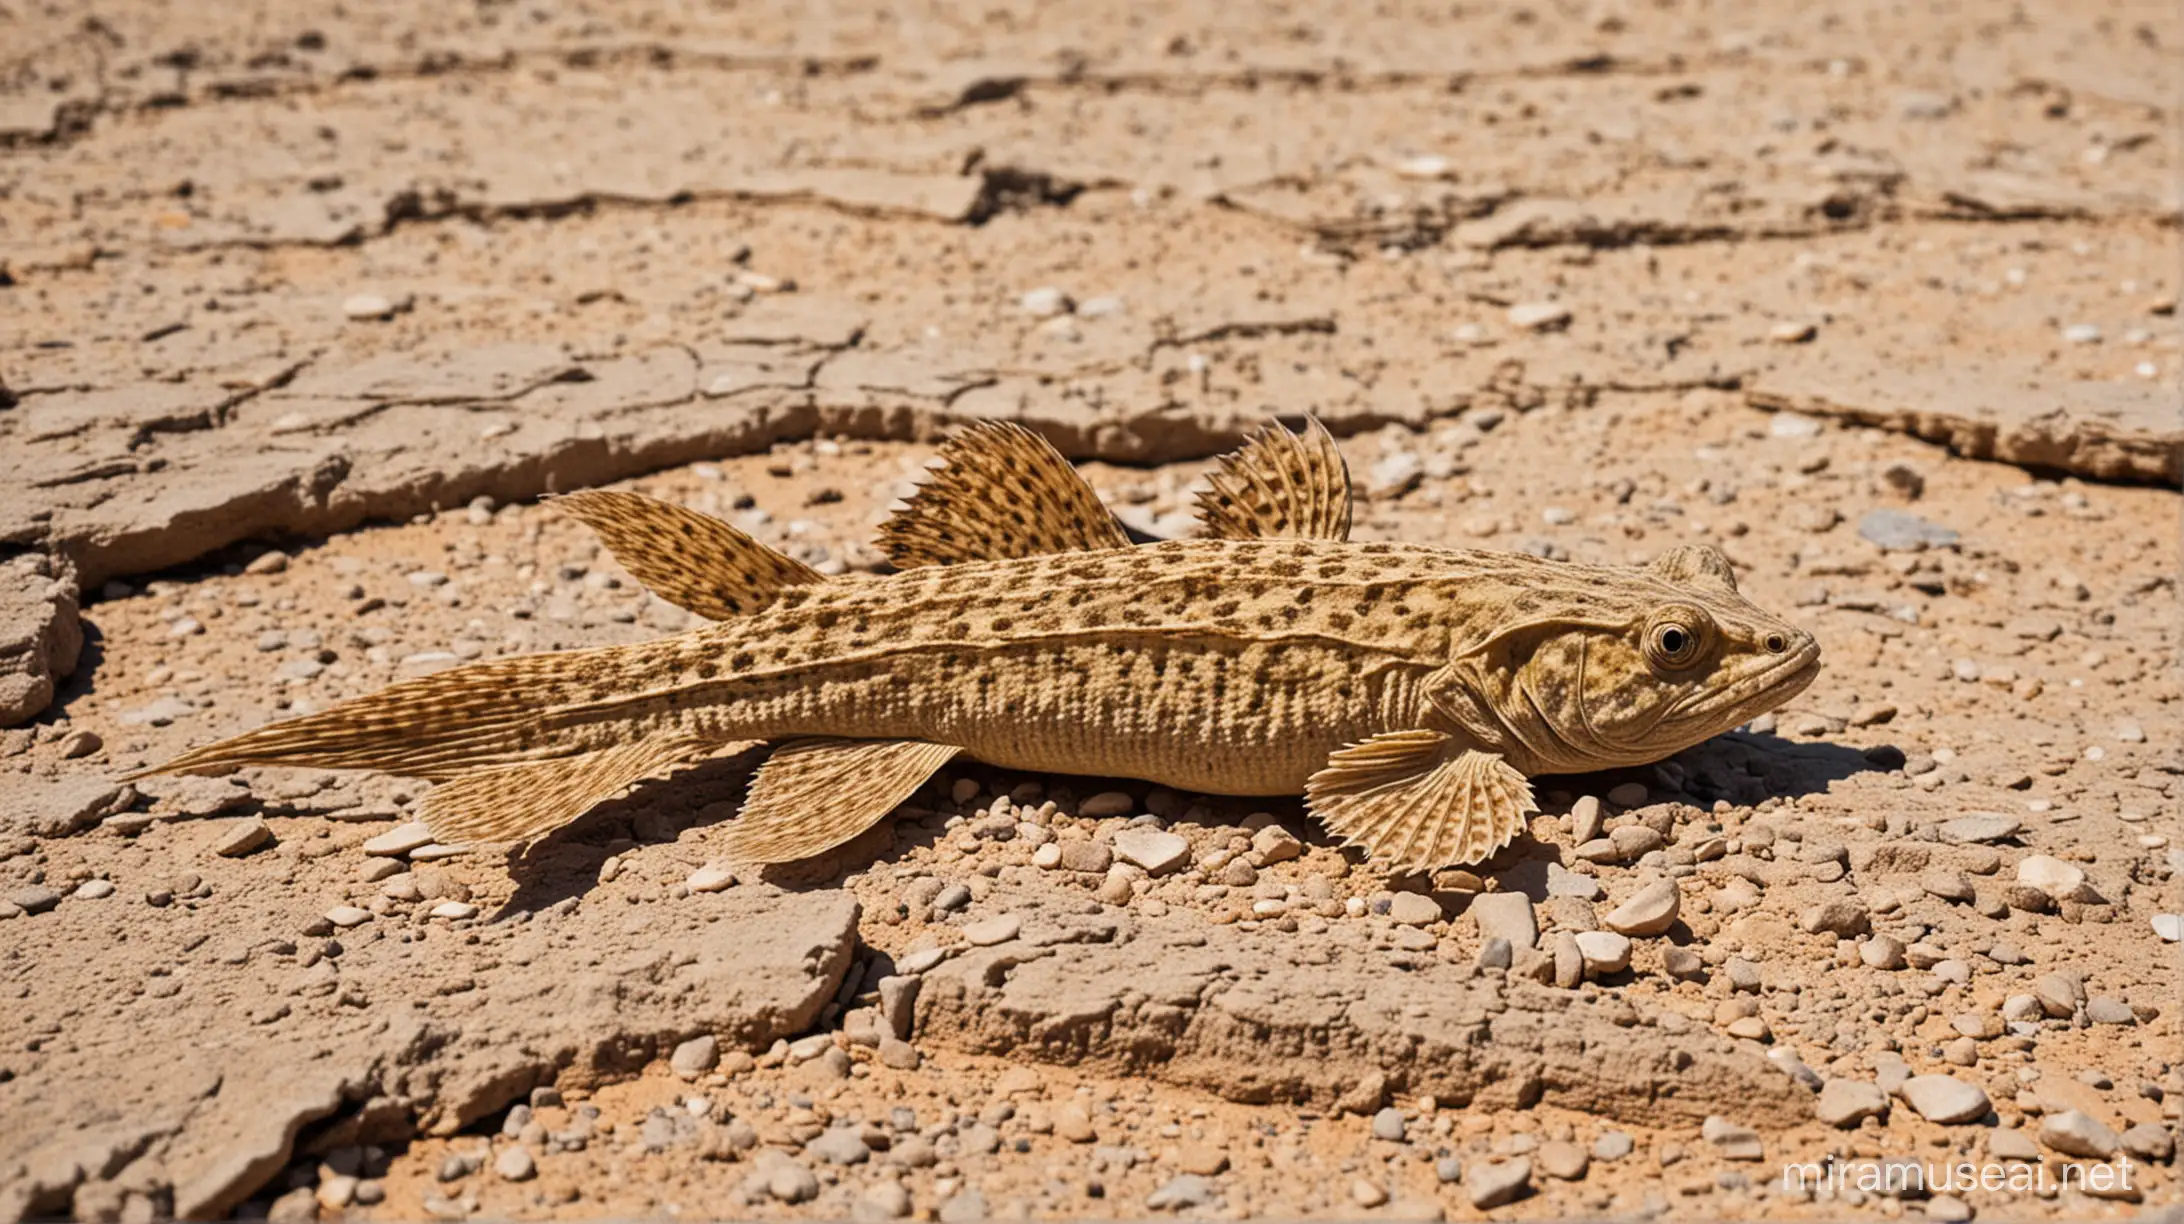 a extremely dry pleco fish in a dry cracked desert environment